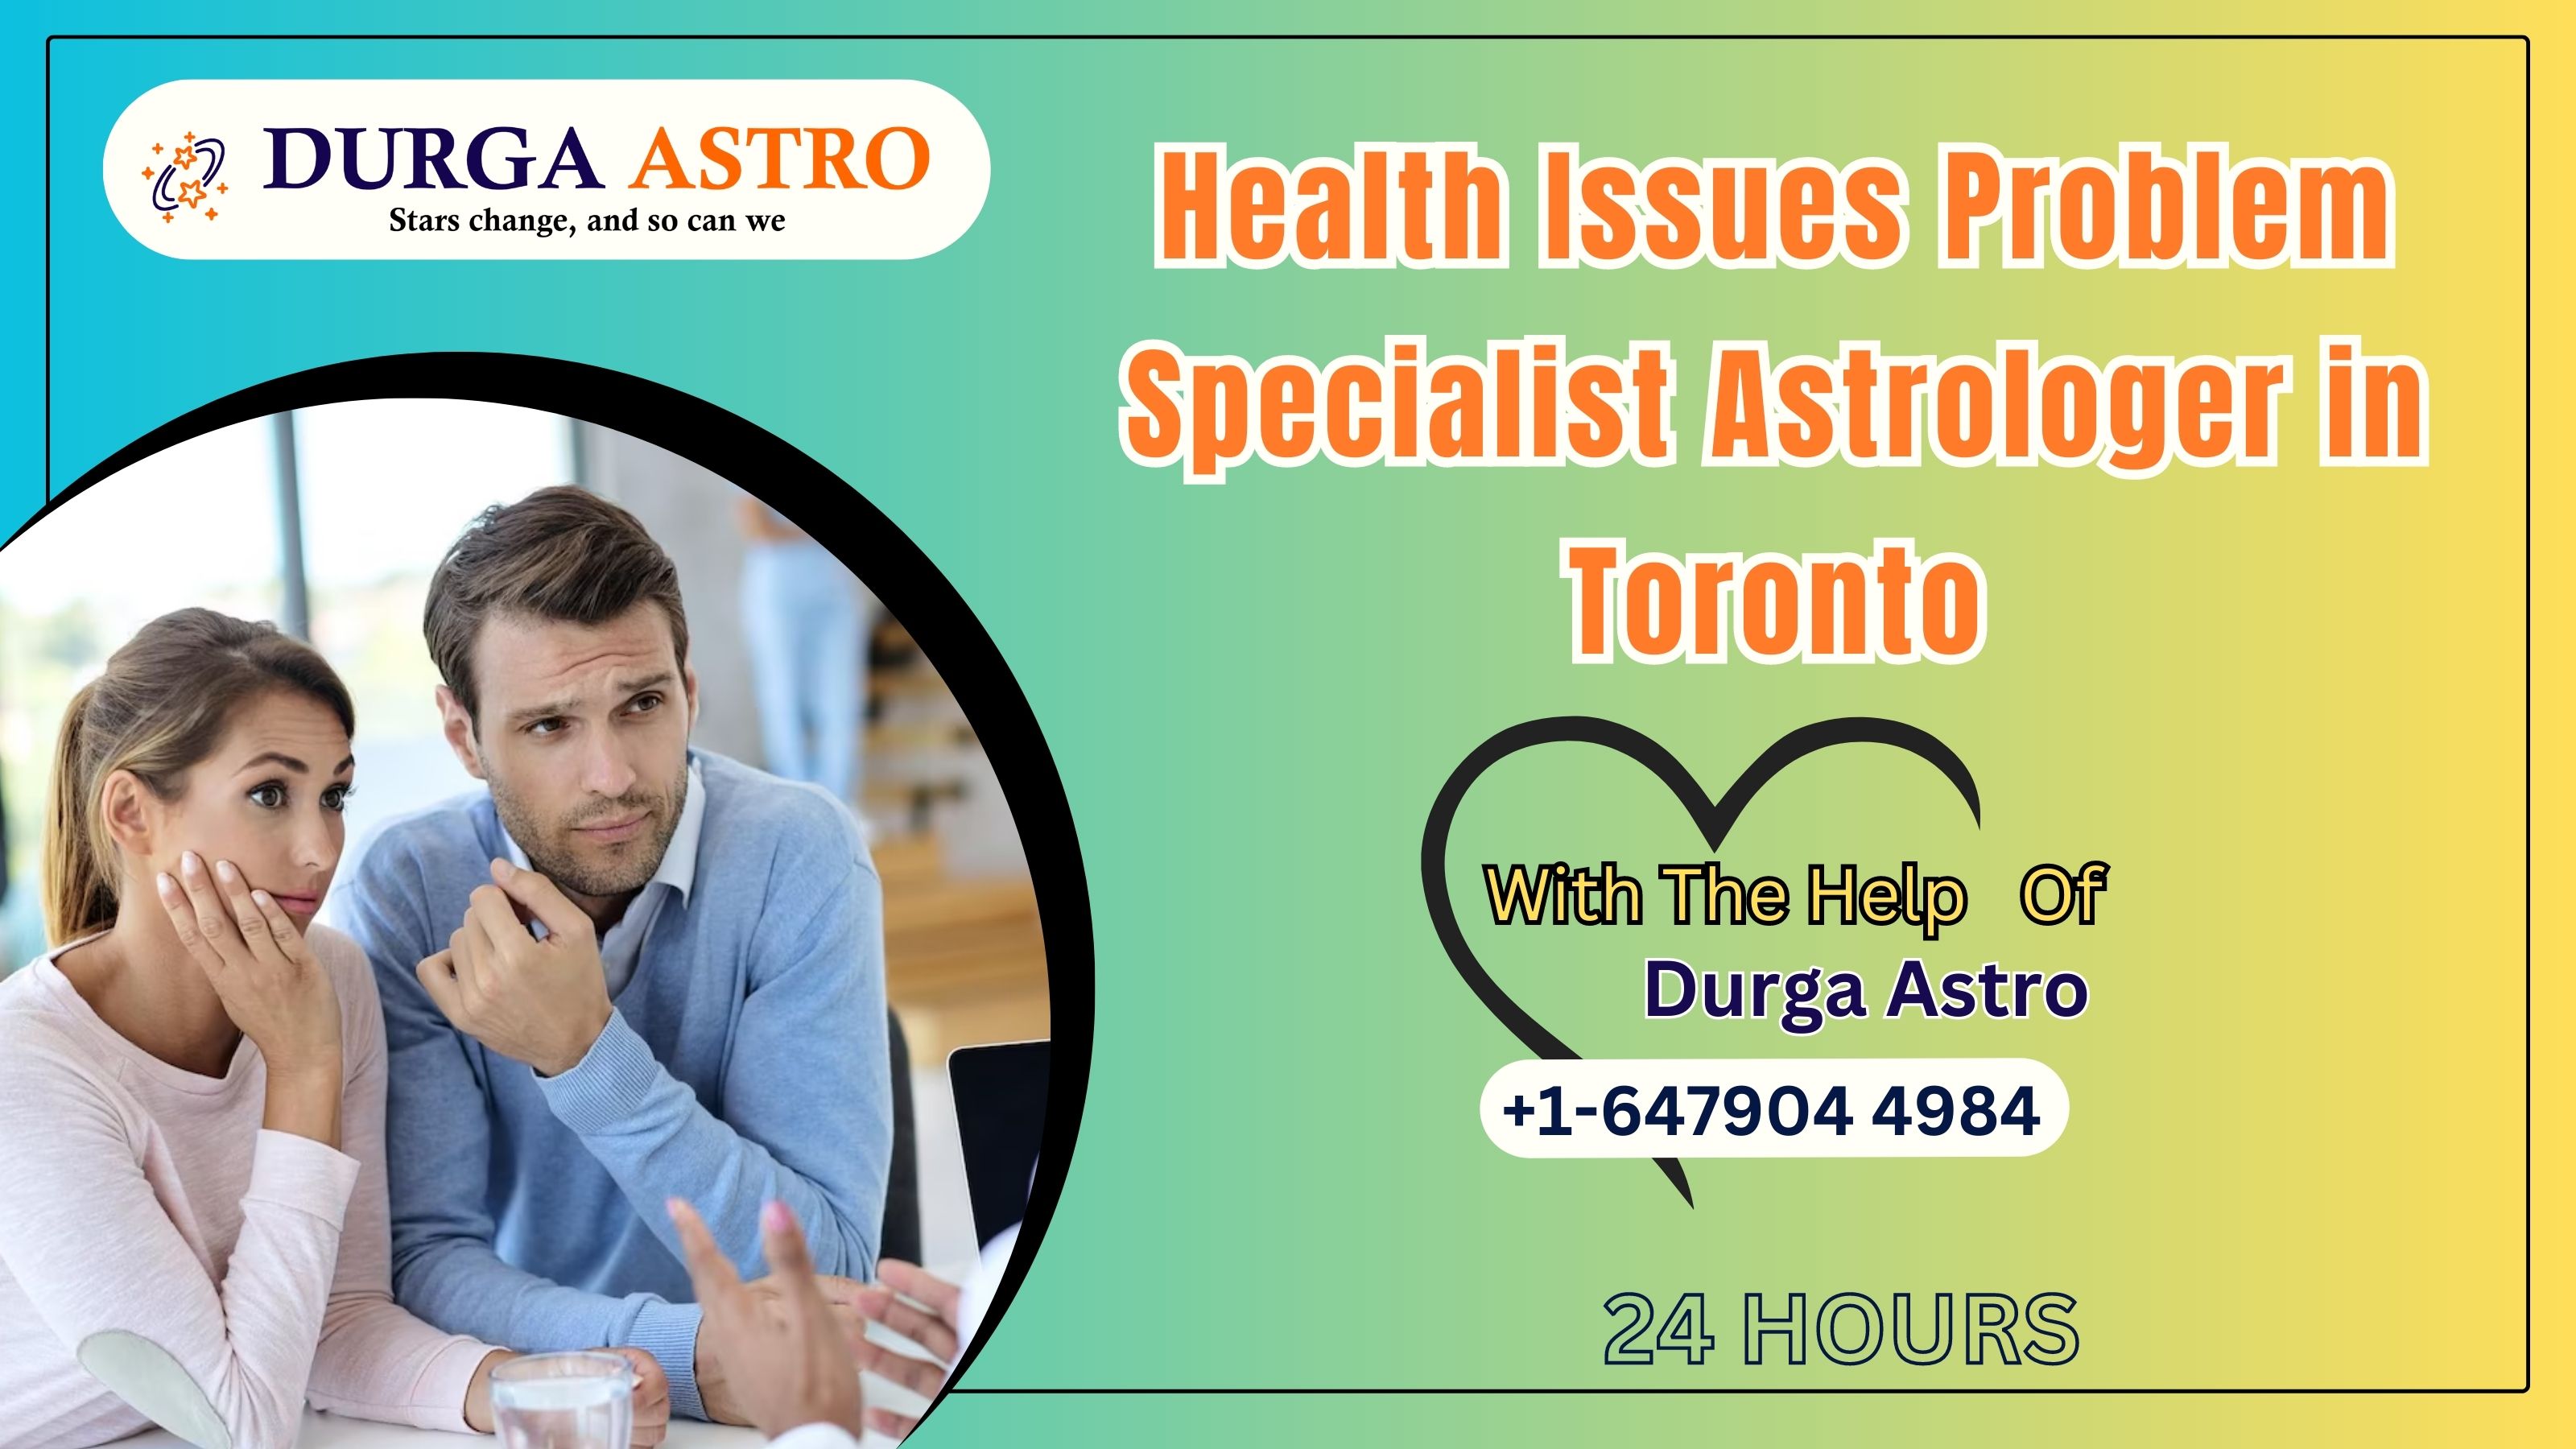 Health Issues Problem Specialist Astrologer in Toronto